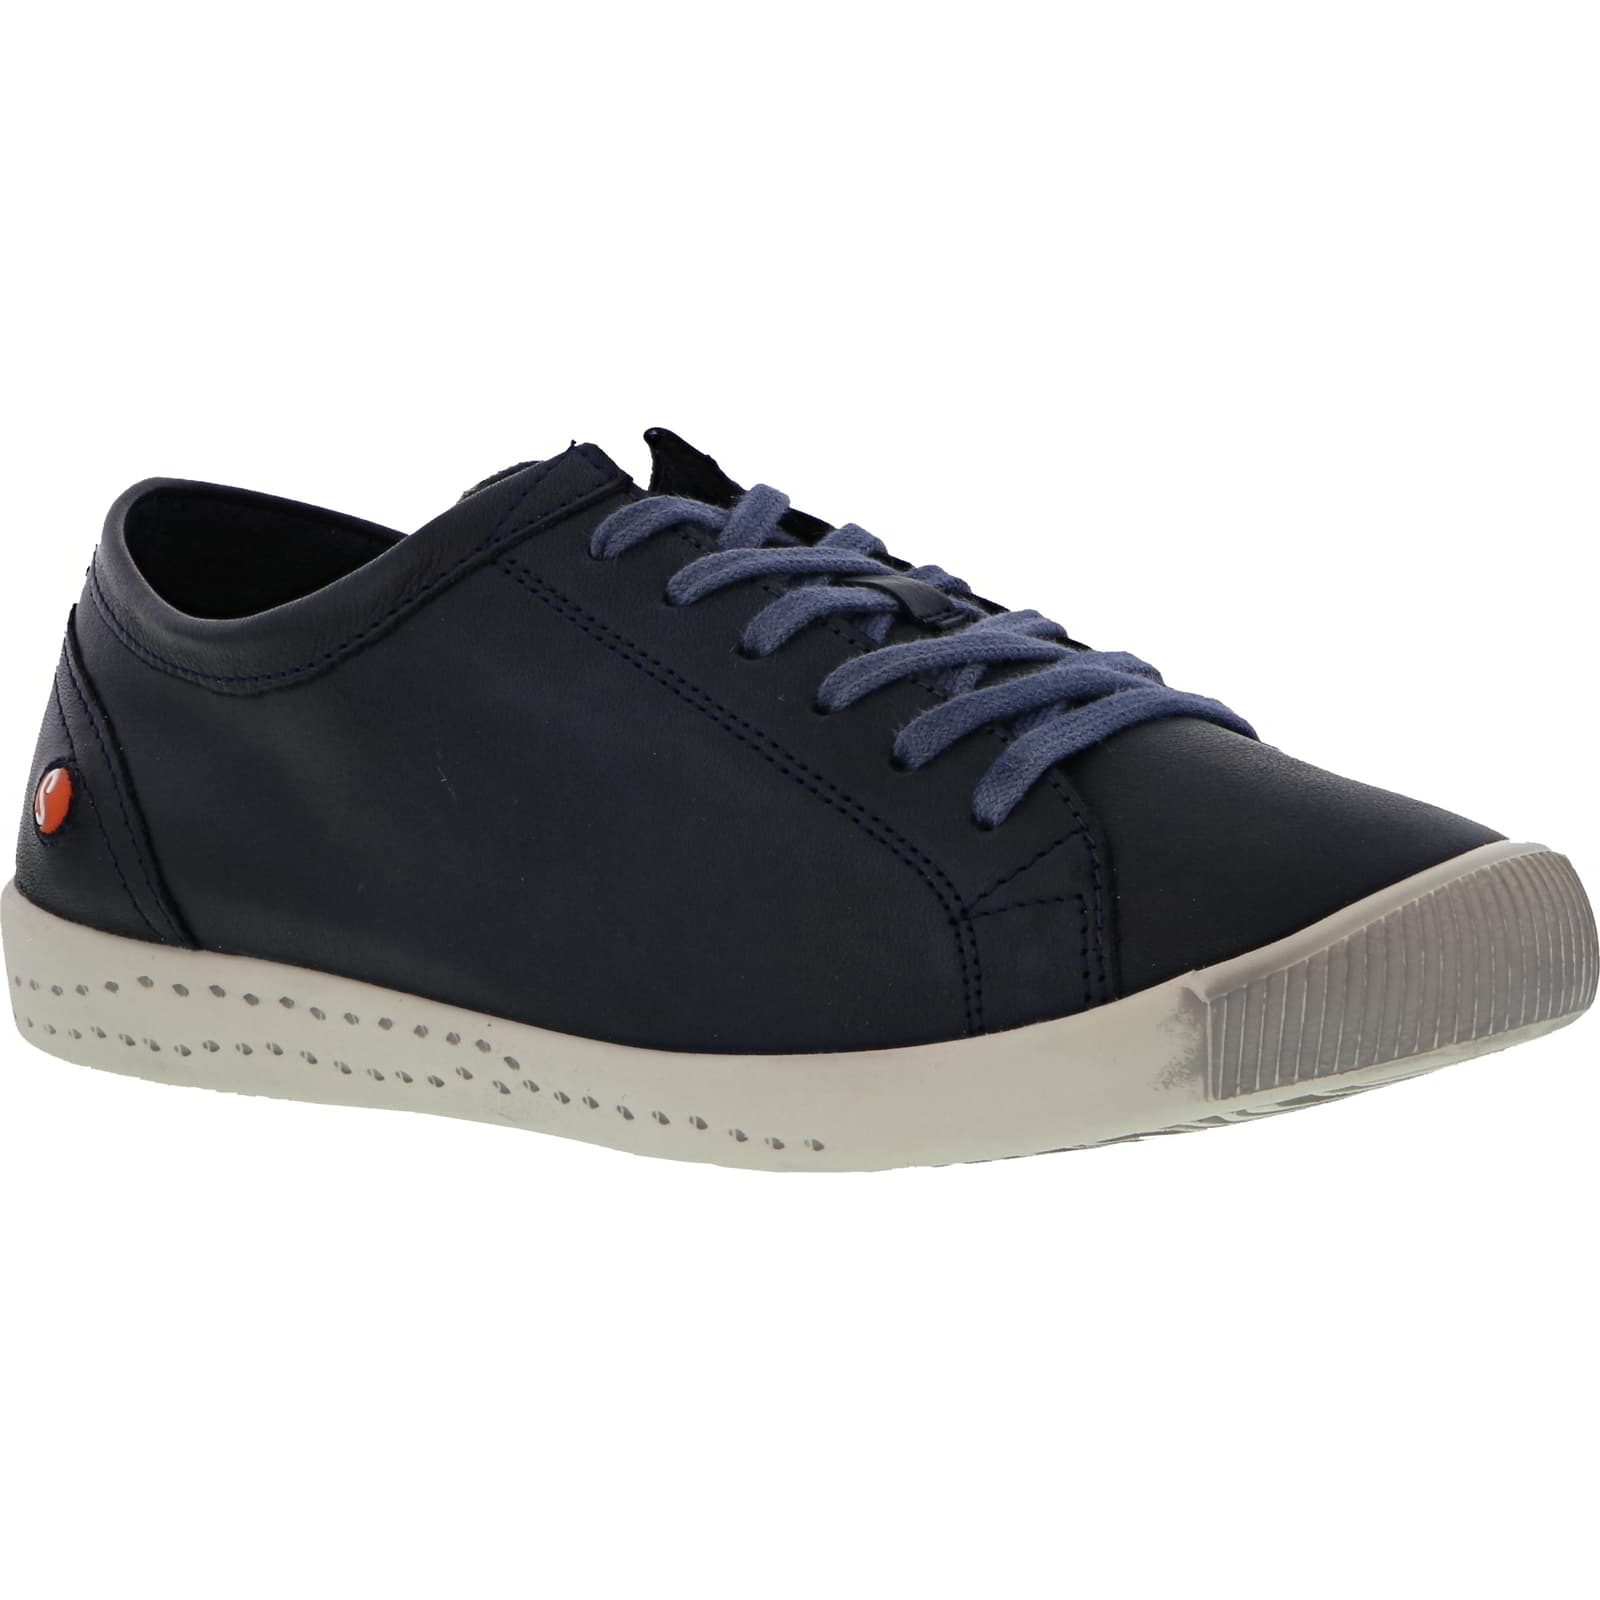 Softinos By Fly London Women's Isla Leather Trainers - Washed Navy - UK 7